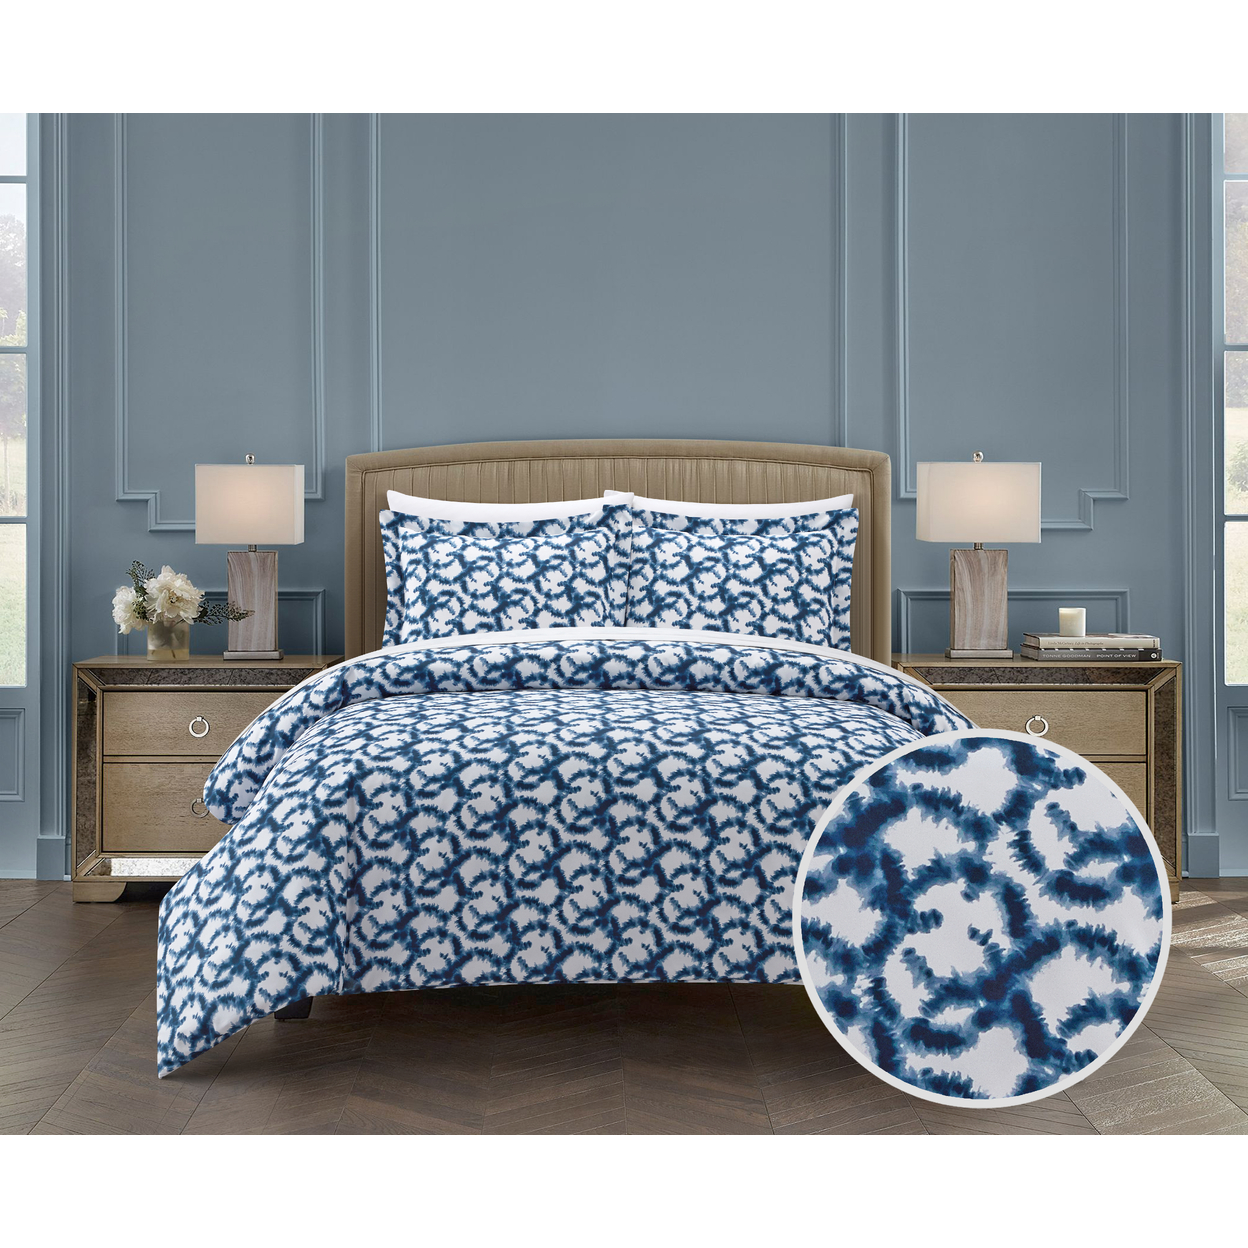 Khrissie 2 Or 3 Piece Duvet Cover Set Watercolor Overlapping Rings Pattern - Navy, Queen